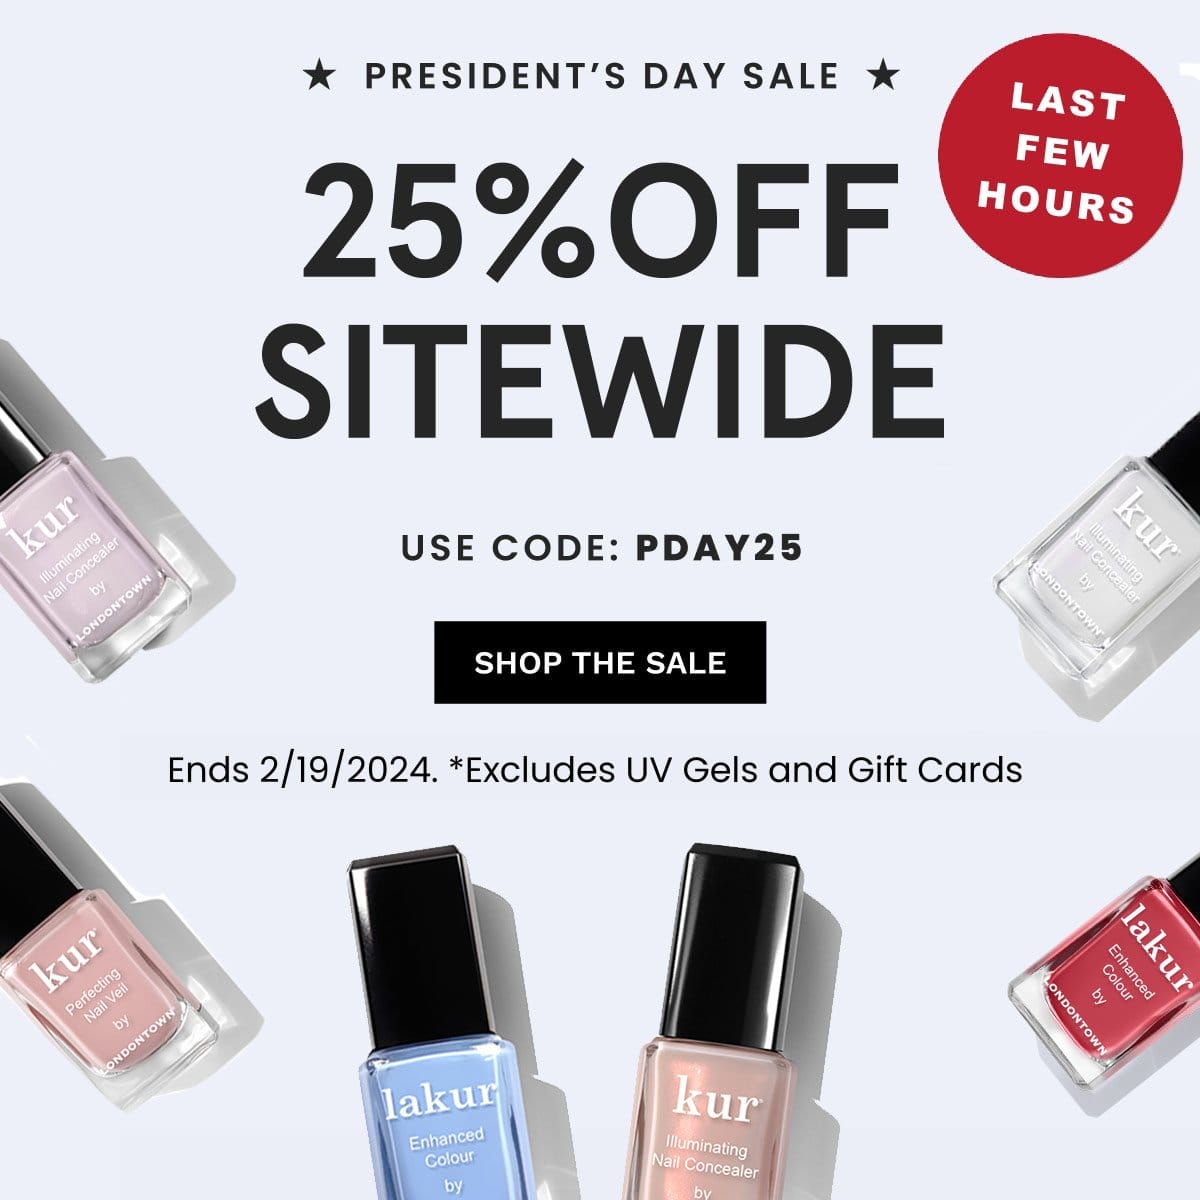 25% OFF! Use Code PDAY25